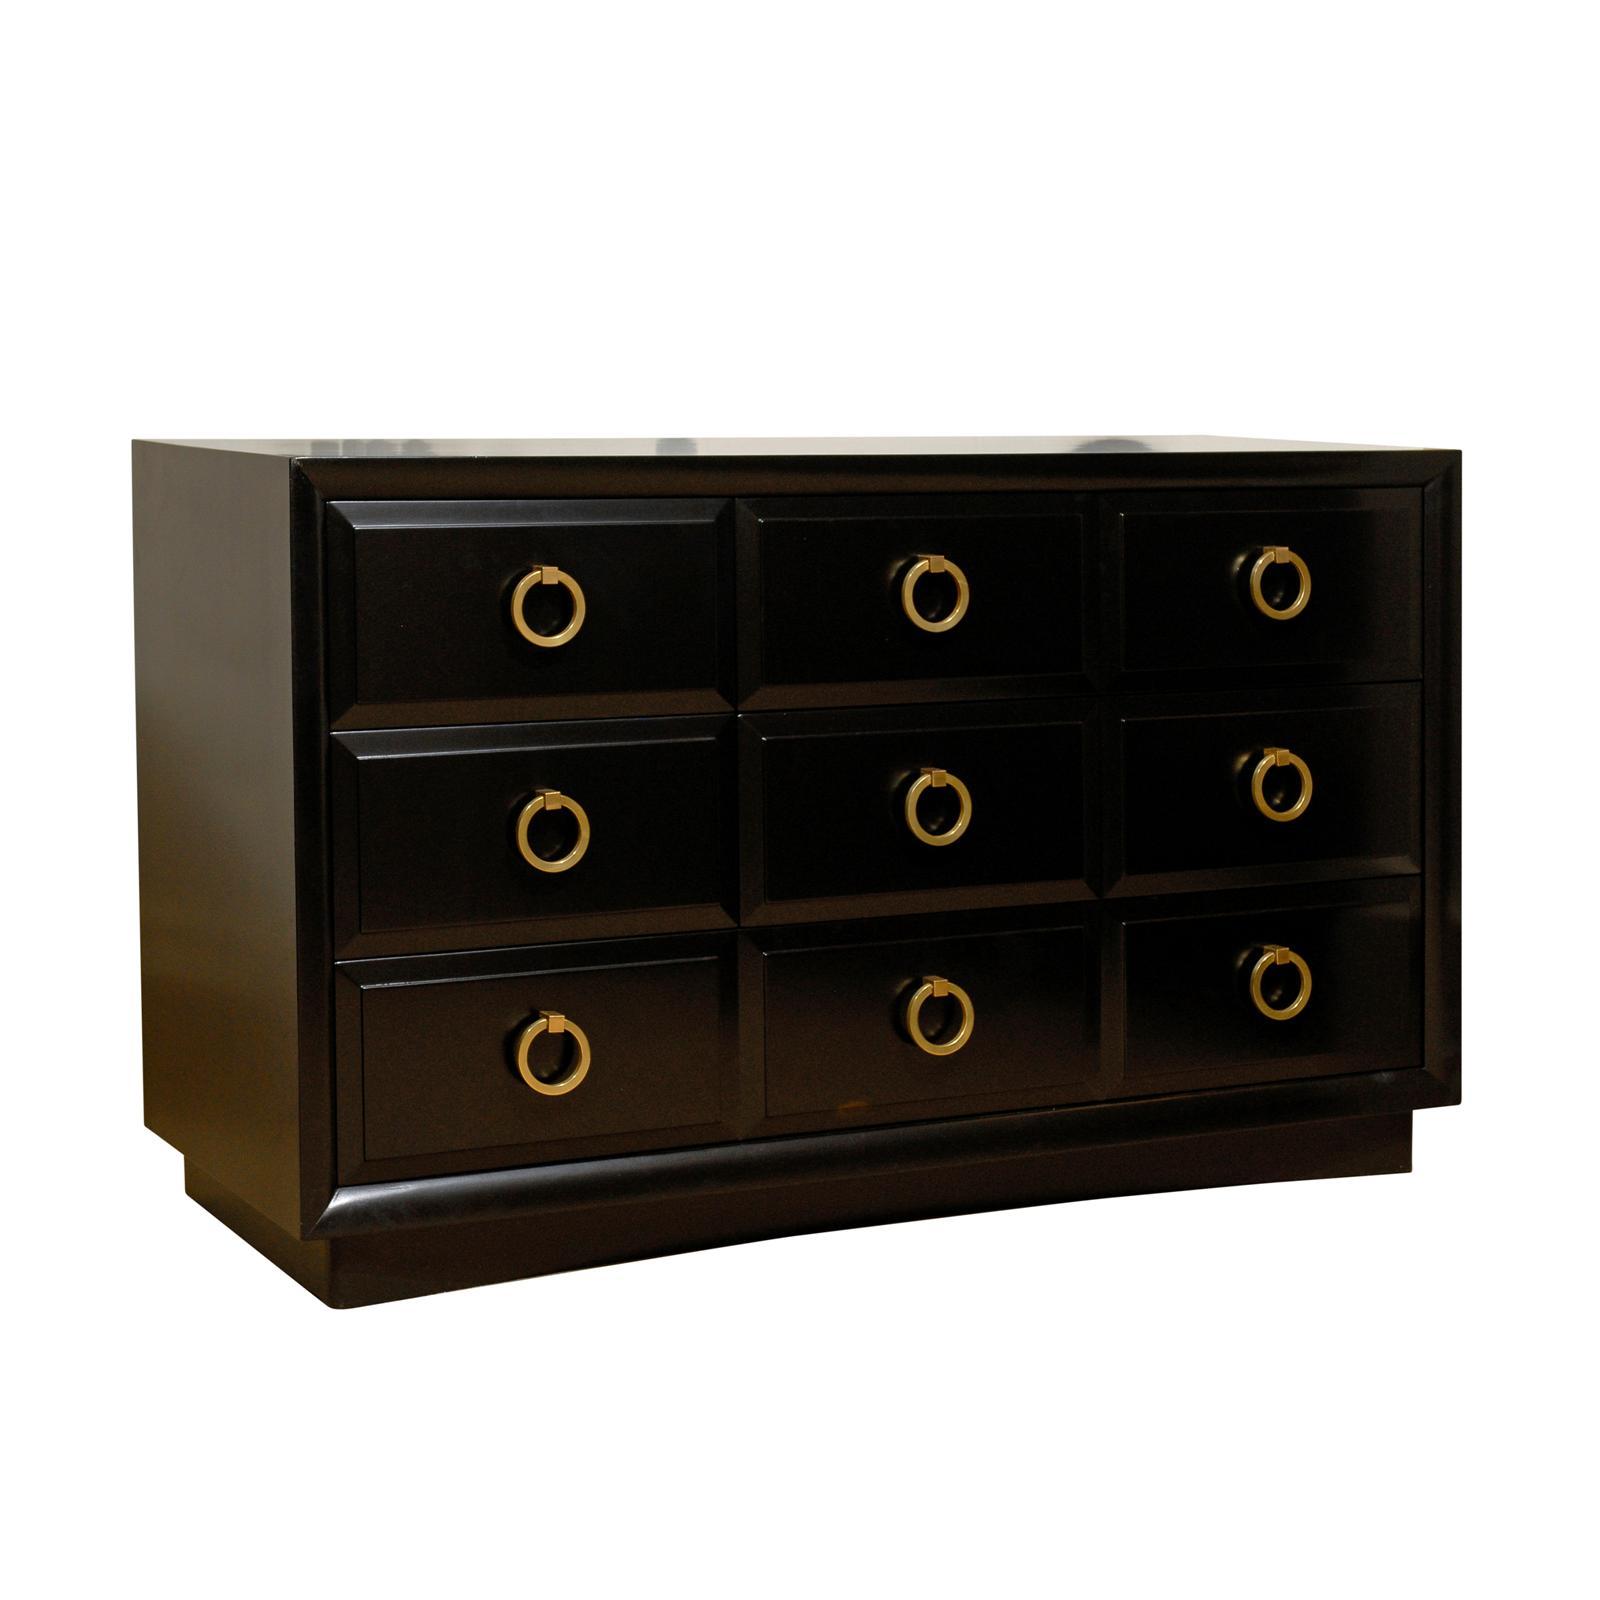 Exceptional Chest/Buffet by Robsjohn-Gibbings for Widdicomb in Black Lacquer